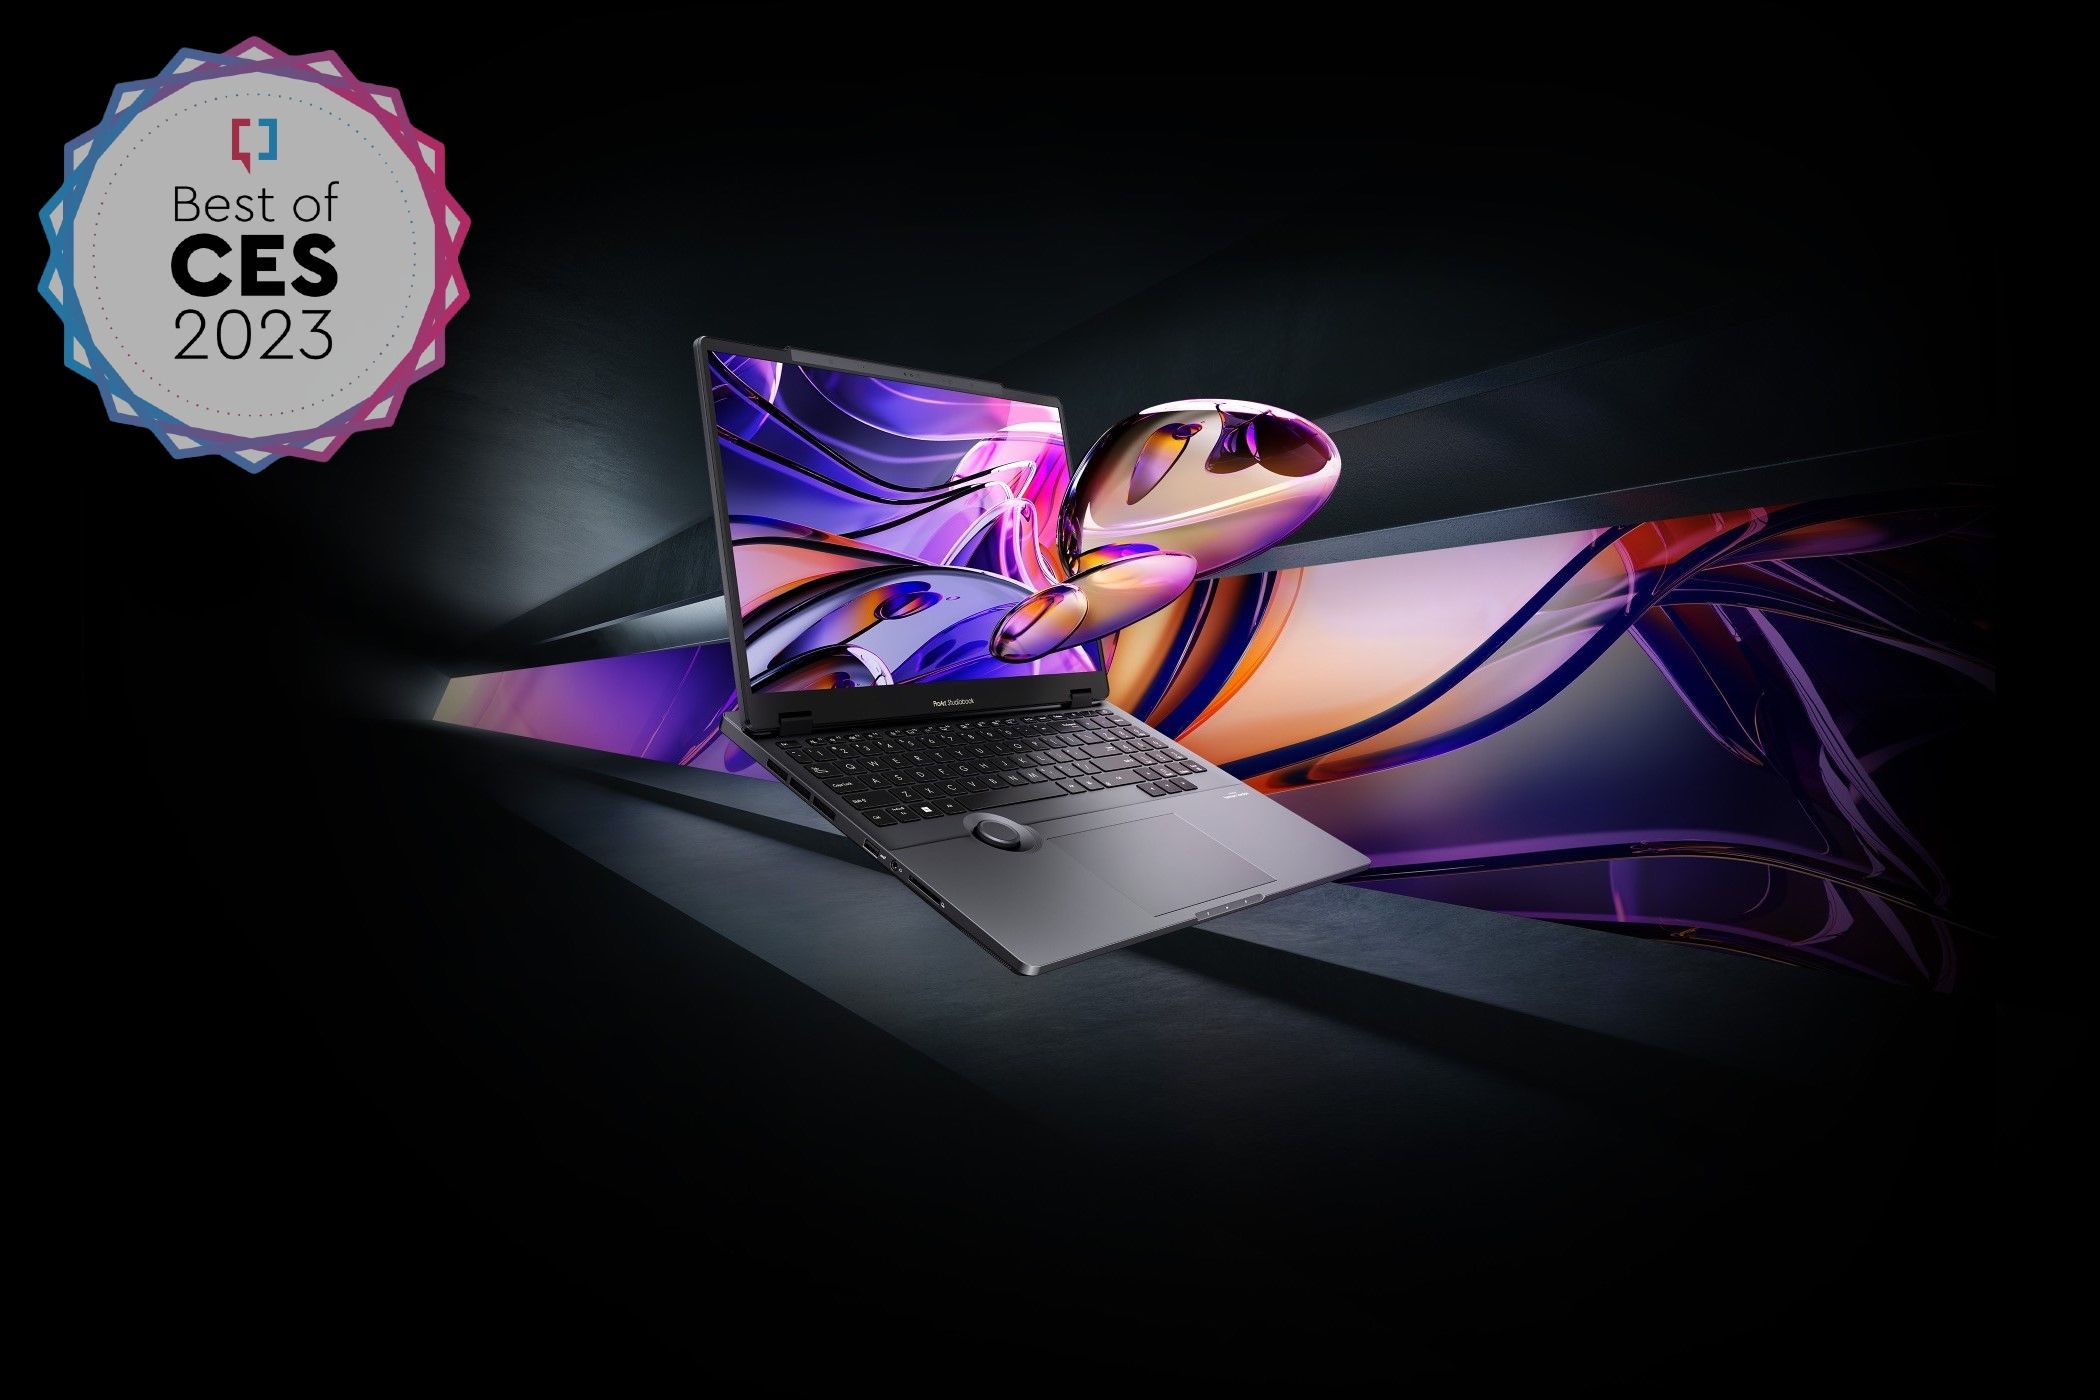 Angled front visualization of the Asus ProArt StudioBook 3D OLED laptop, with a simulated effect depciting 3D content popping out of the display. Overhead view of the Dell Premier Collaboration Keyboard with touch-based shortcuts for Zoom features. The top left corner of the image has a badge reading 